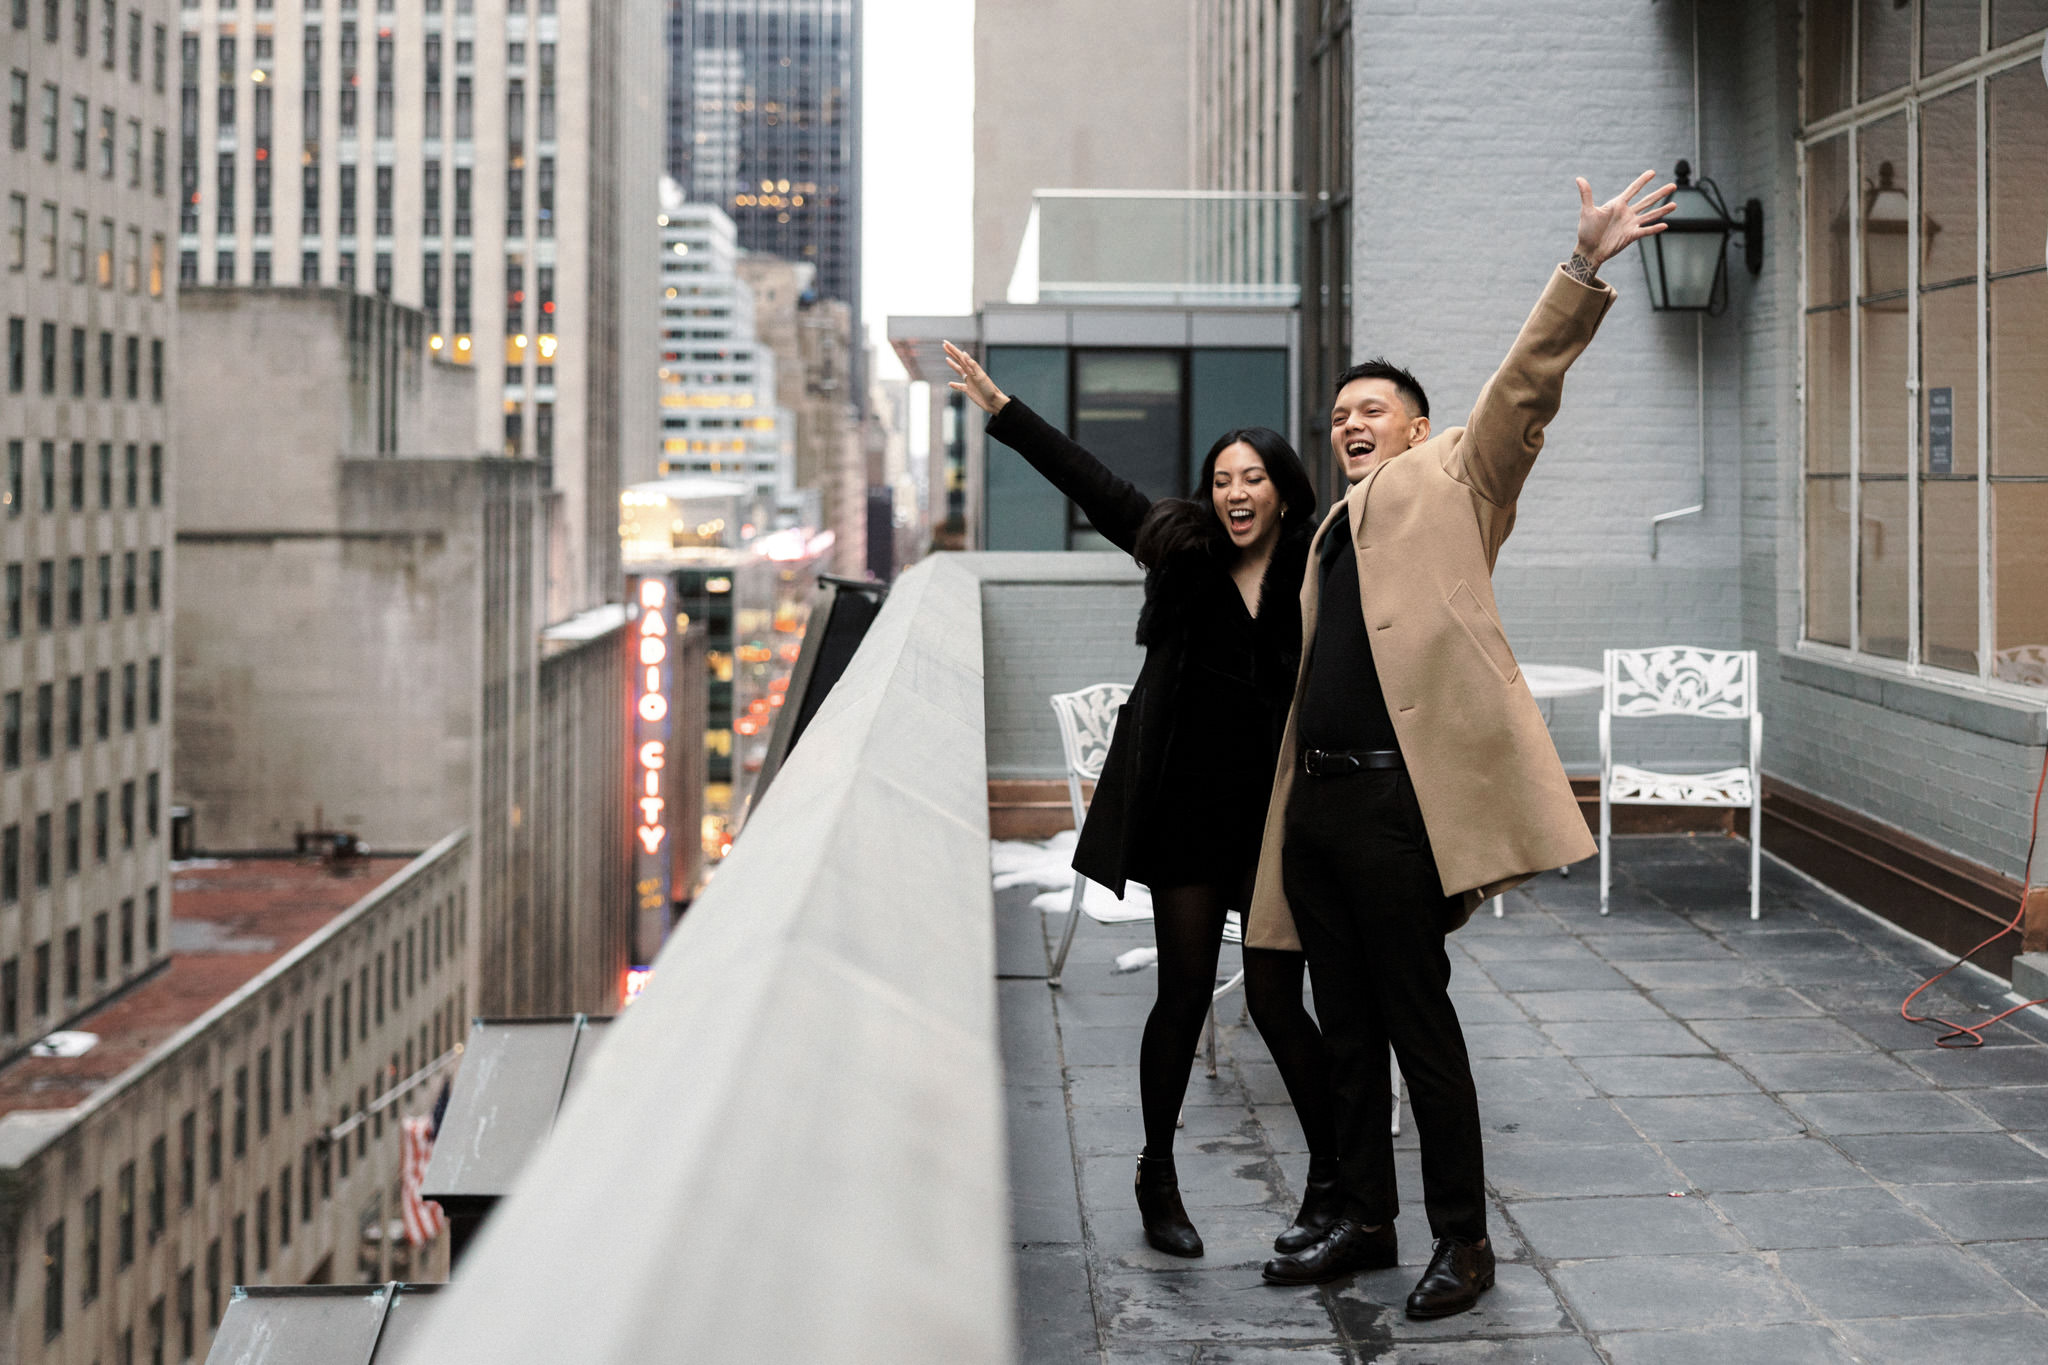 The couple is happily waving their hands in the air after the proposal. Proposal in NYC Image by Jenny Fu Studio 